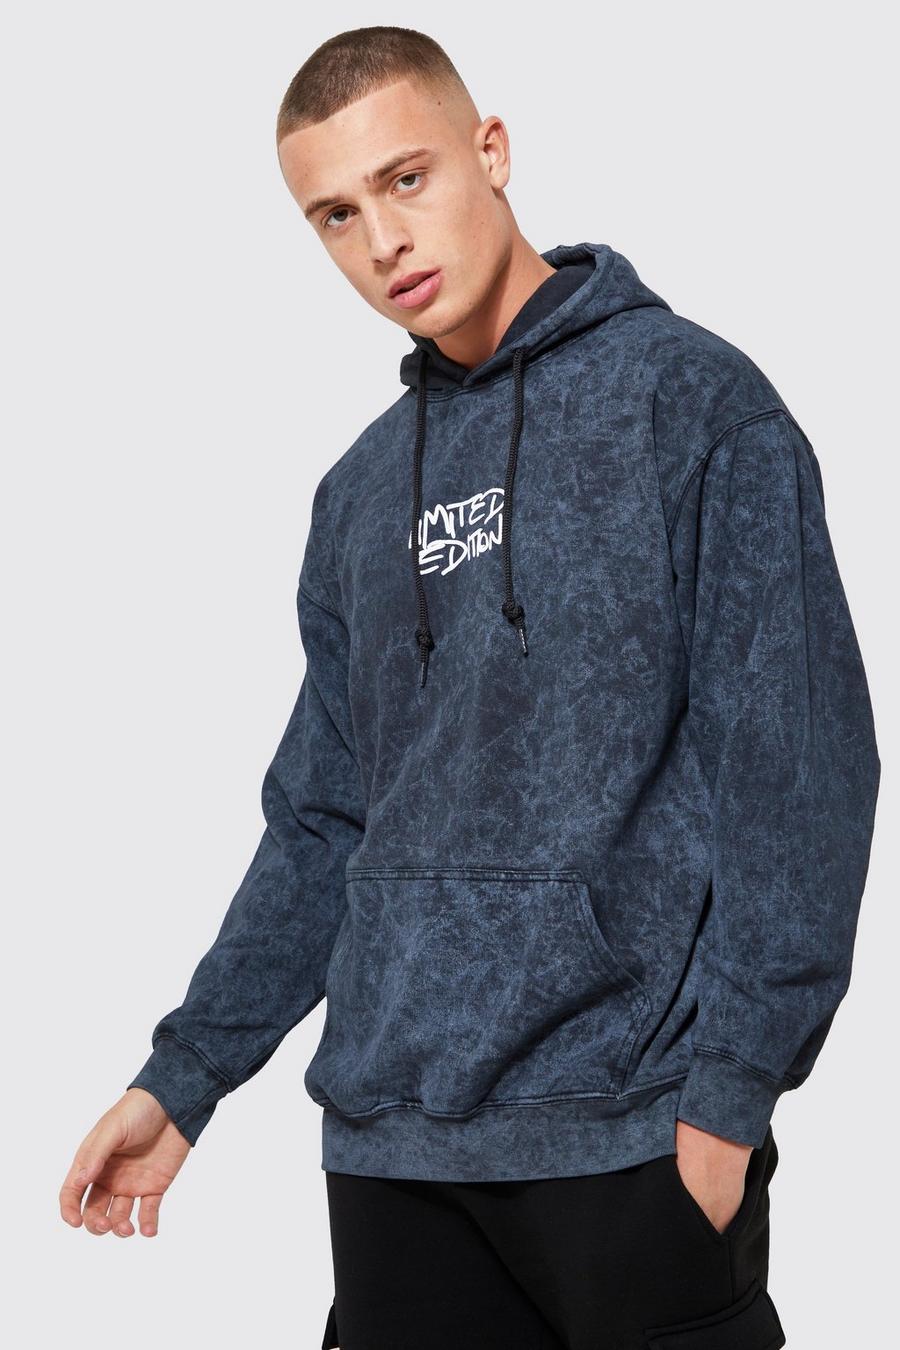 Charcoal grey Oversized Limited Edition Acid Wash Hoodie